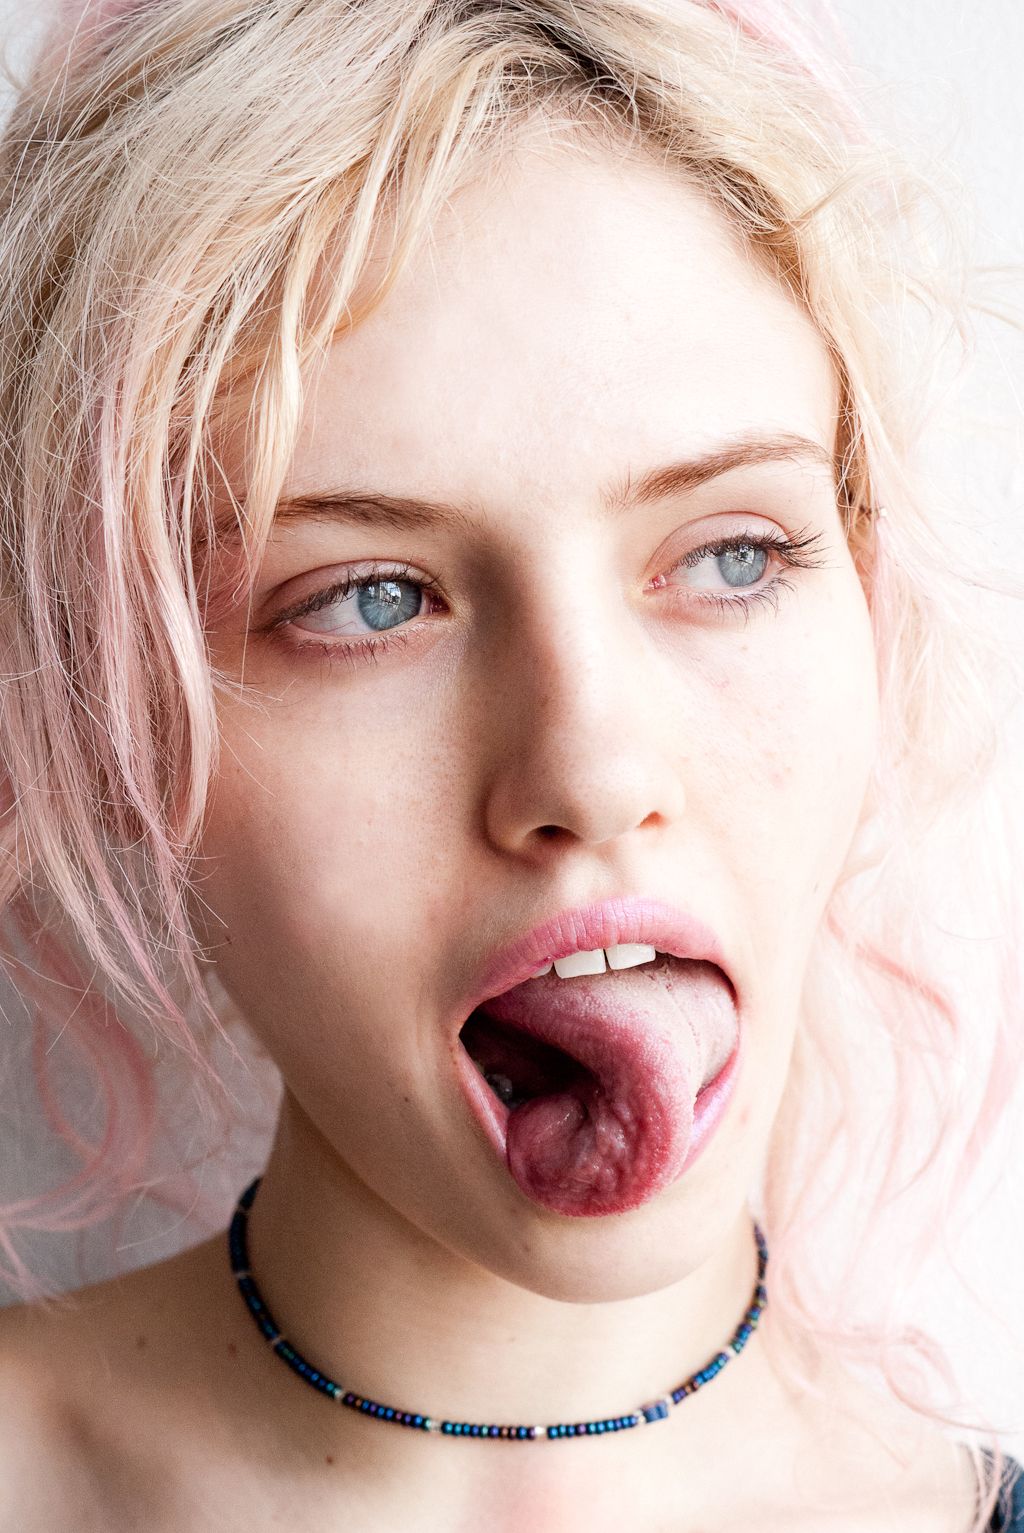 People 1024x1533 Charlotte Free women model tongue out blue eyes pink hair face